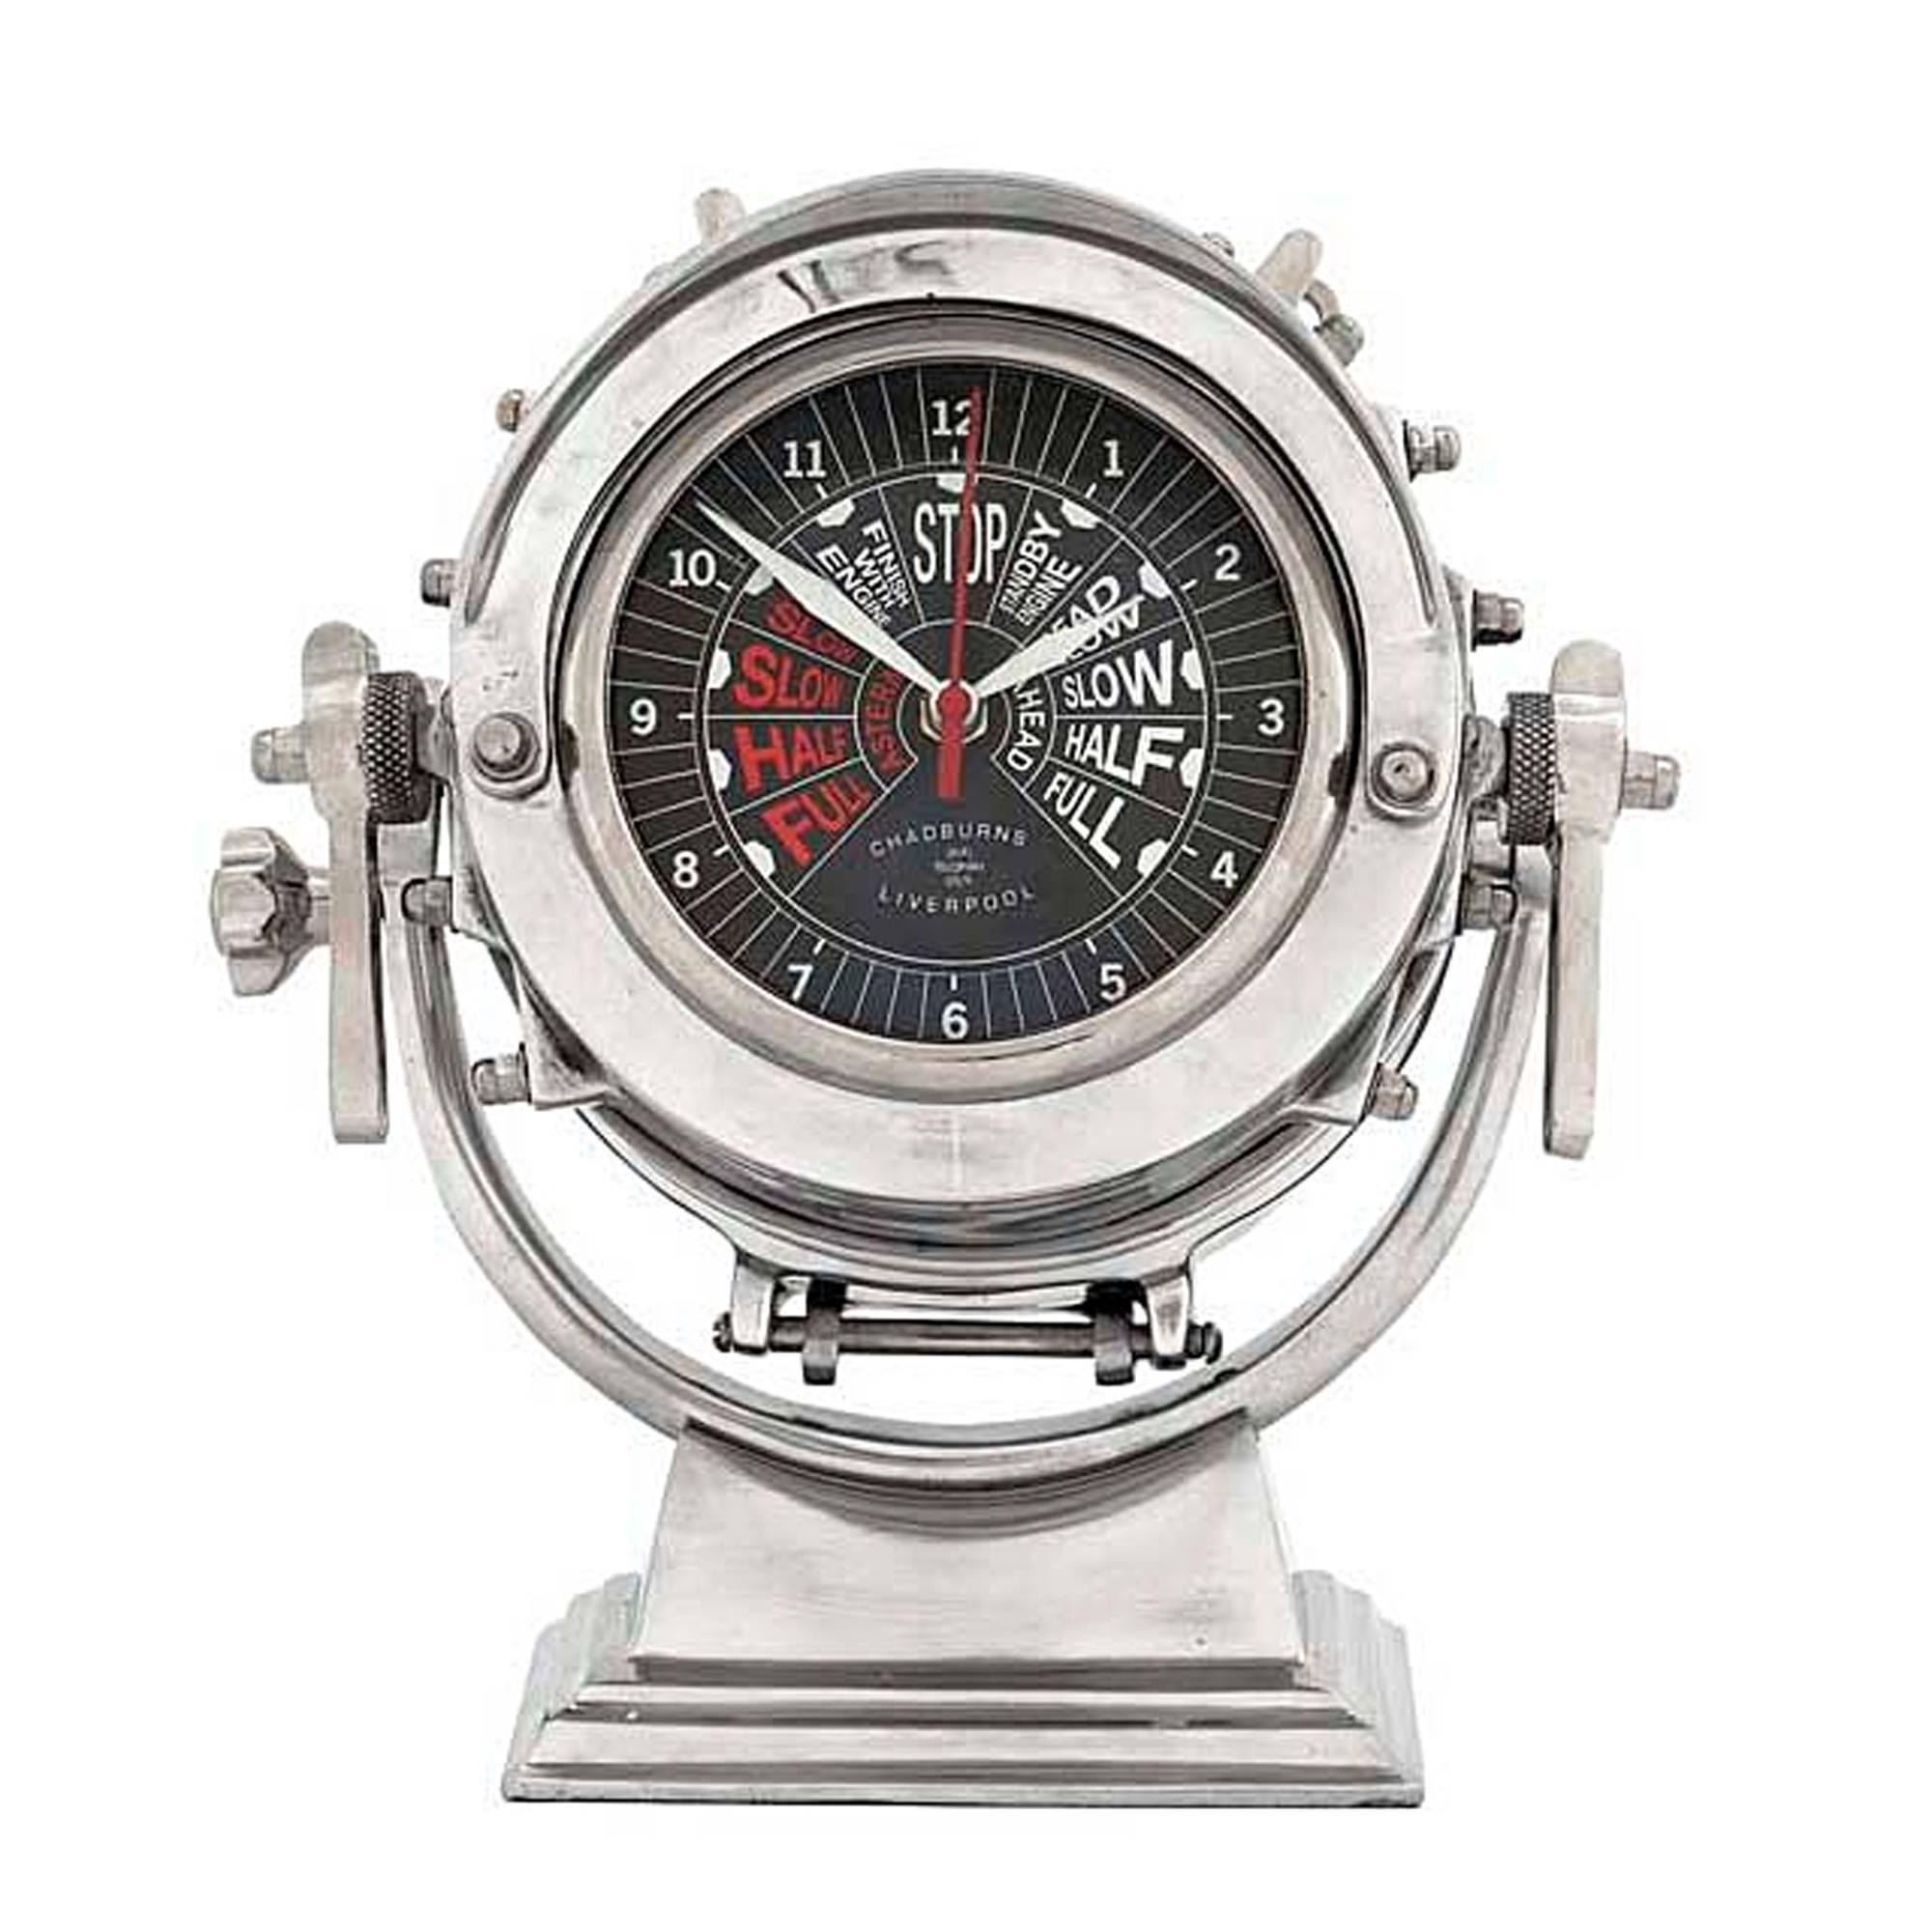 Clock Navy in polished aluminium, iron,
brass and stainless steel.
